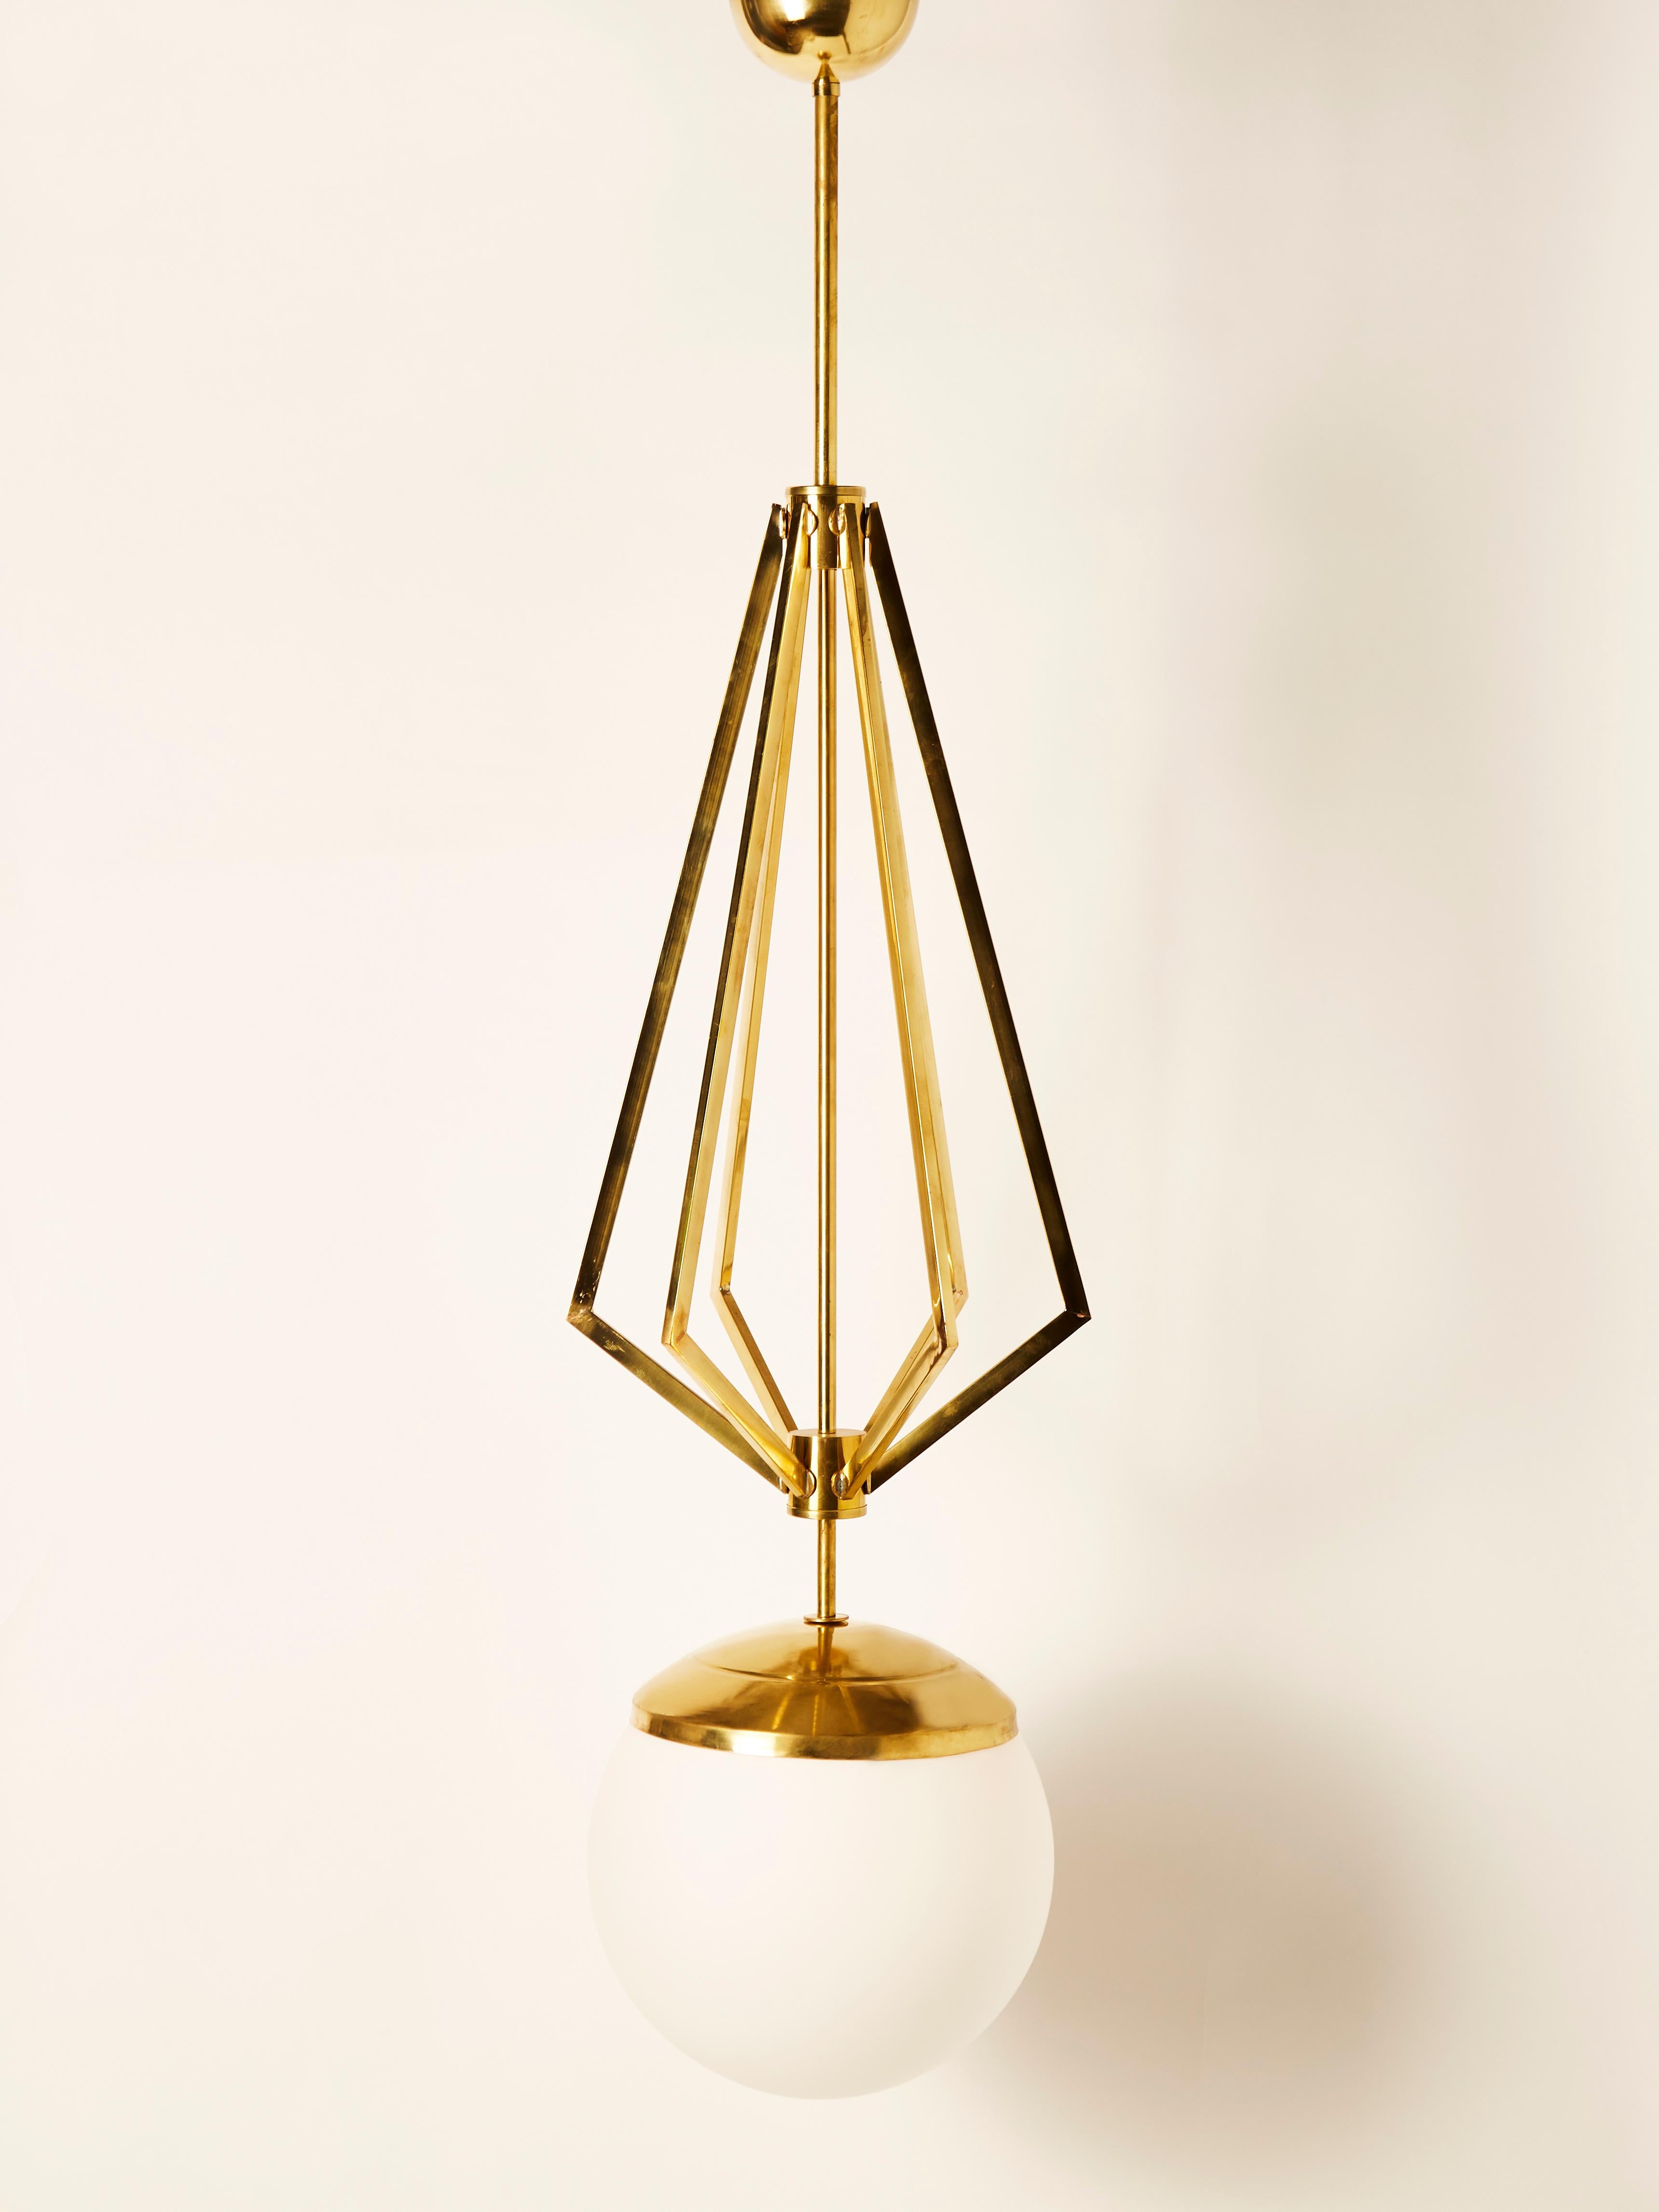 Four suspensions made of a central brass stem, decorative symmetrical rods and a large white glass globe housing a single light source.